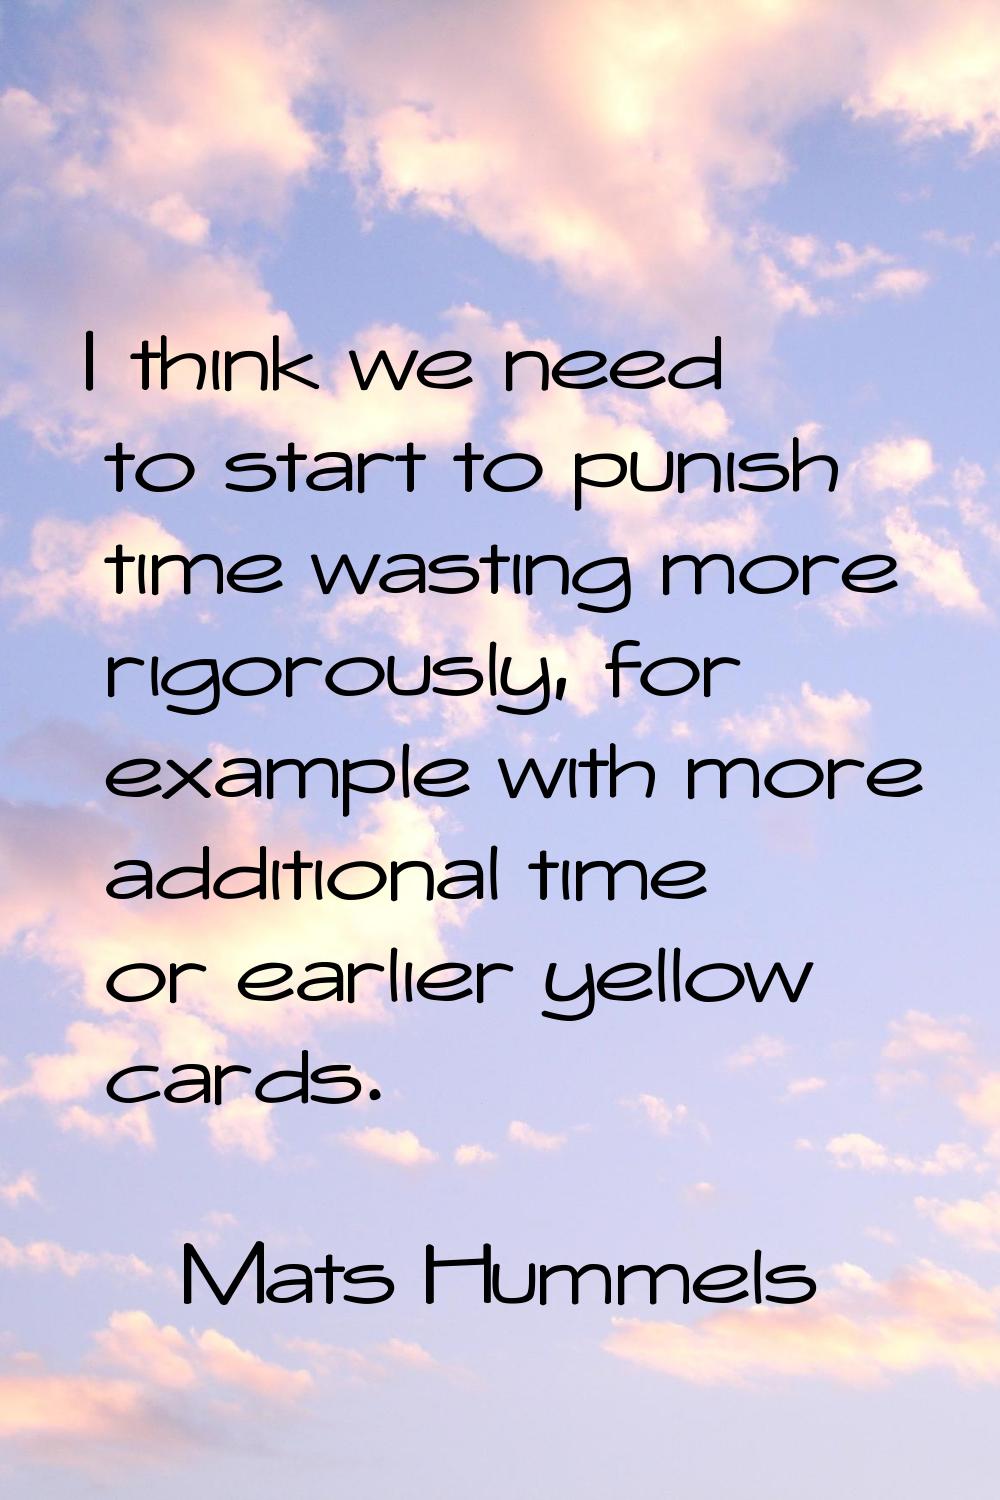 I think we need to start to punish time wasting more rigorously, for example with more additional t